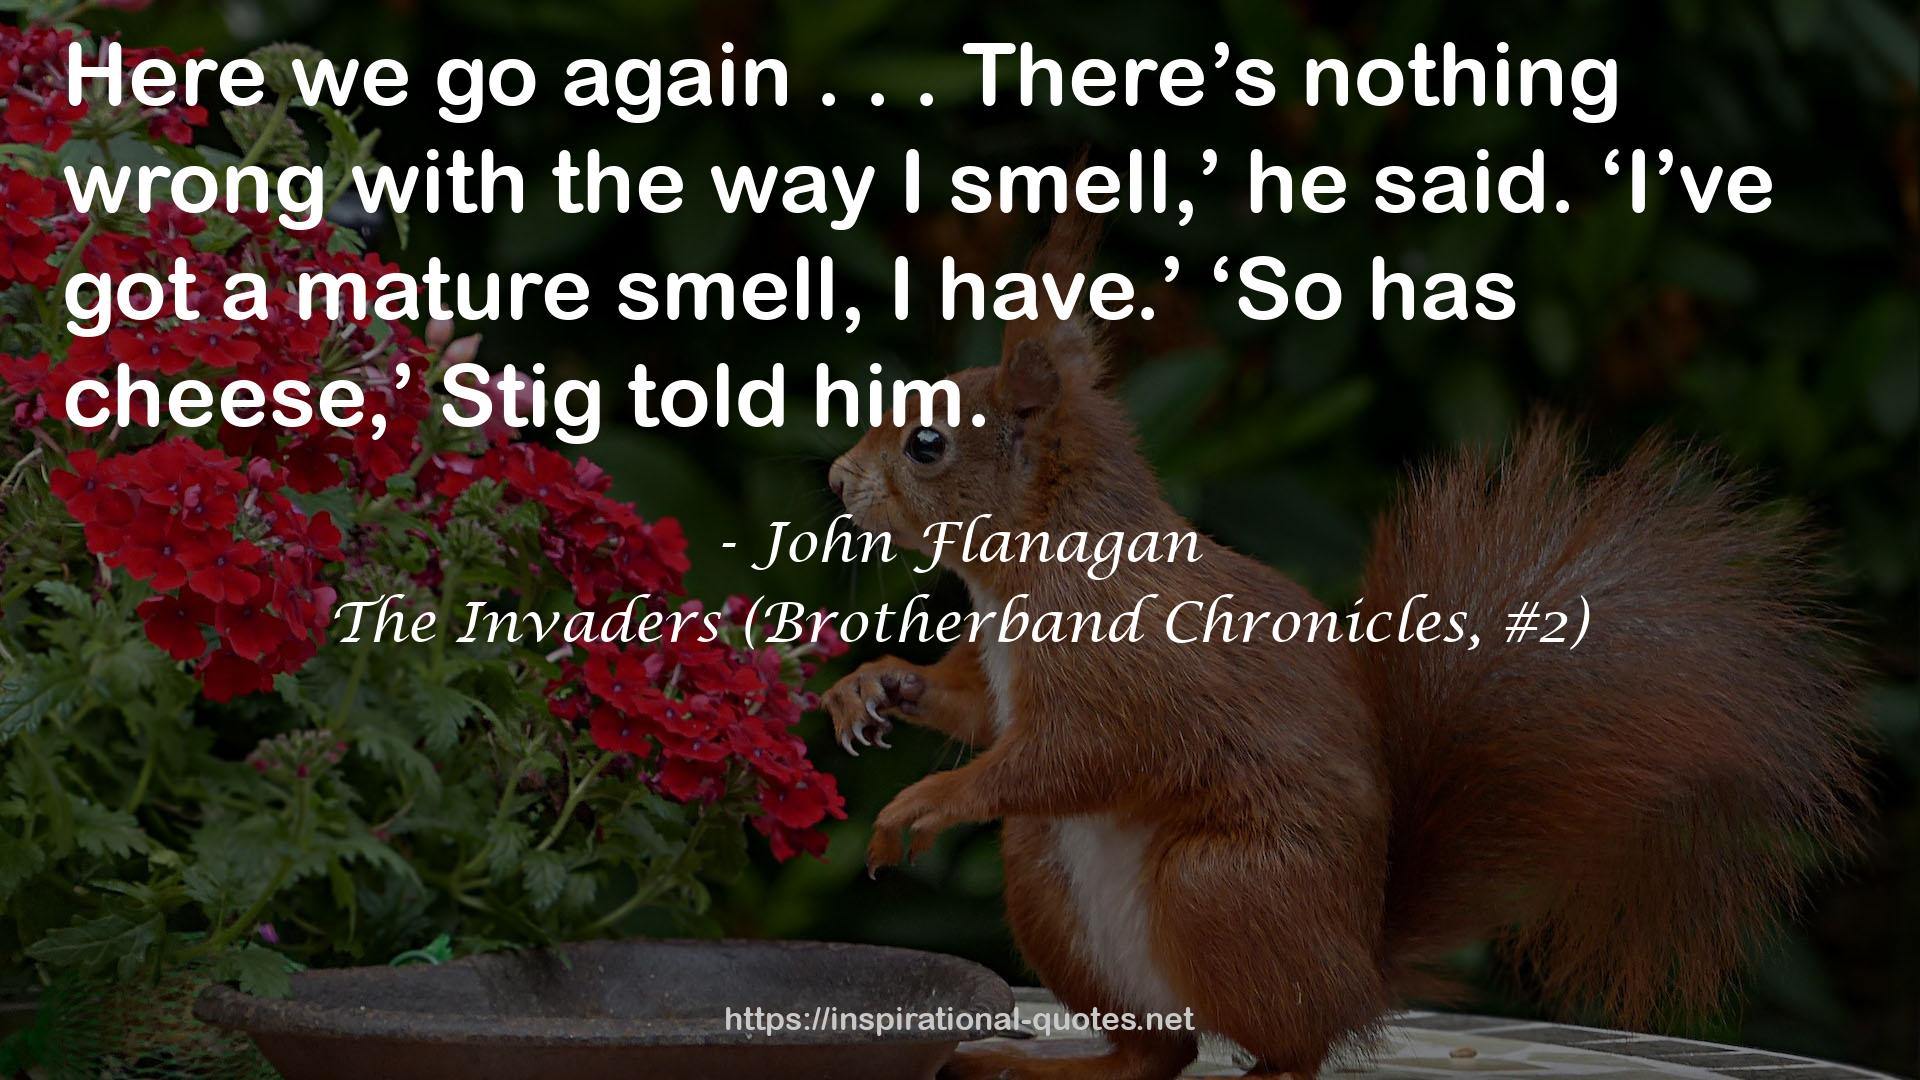 The Invaders (Brotherband Chronicles, #2) QUOTES